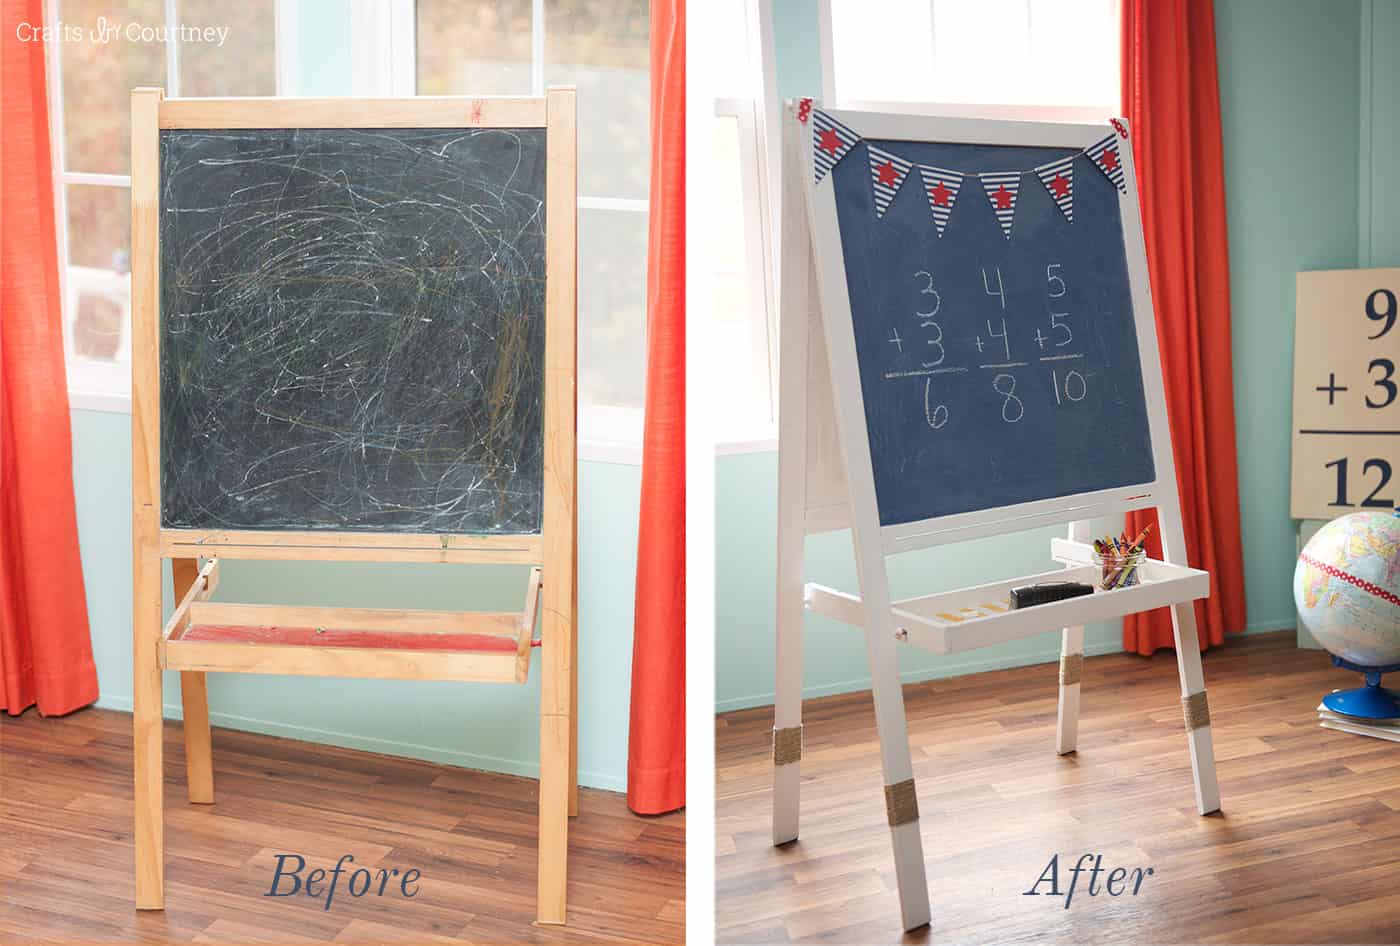 This IKEA easel was trashed by my 3-year-old, so I gave it a complete makeover with Mod Podge clear chalkboard topcoat. You'll love how easy this is!